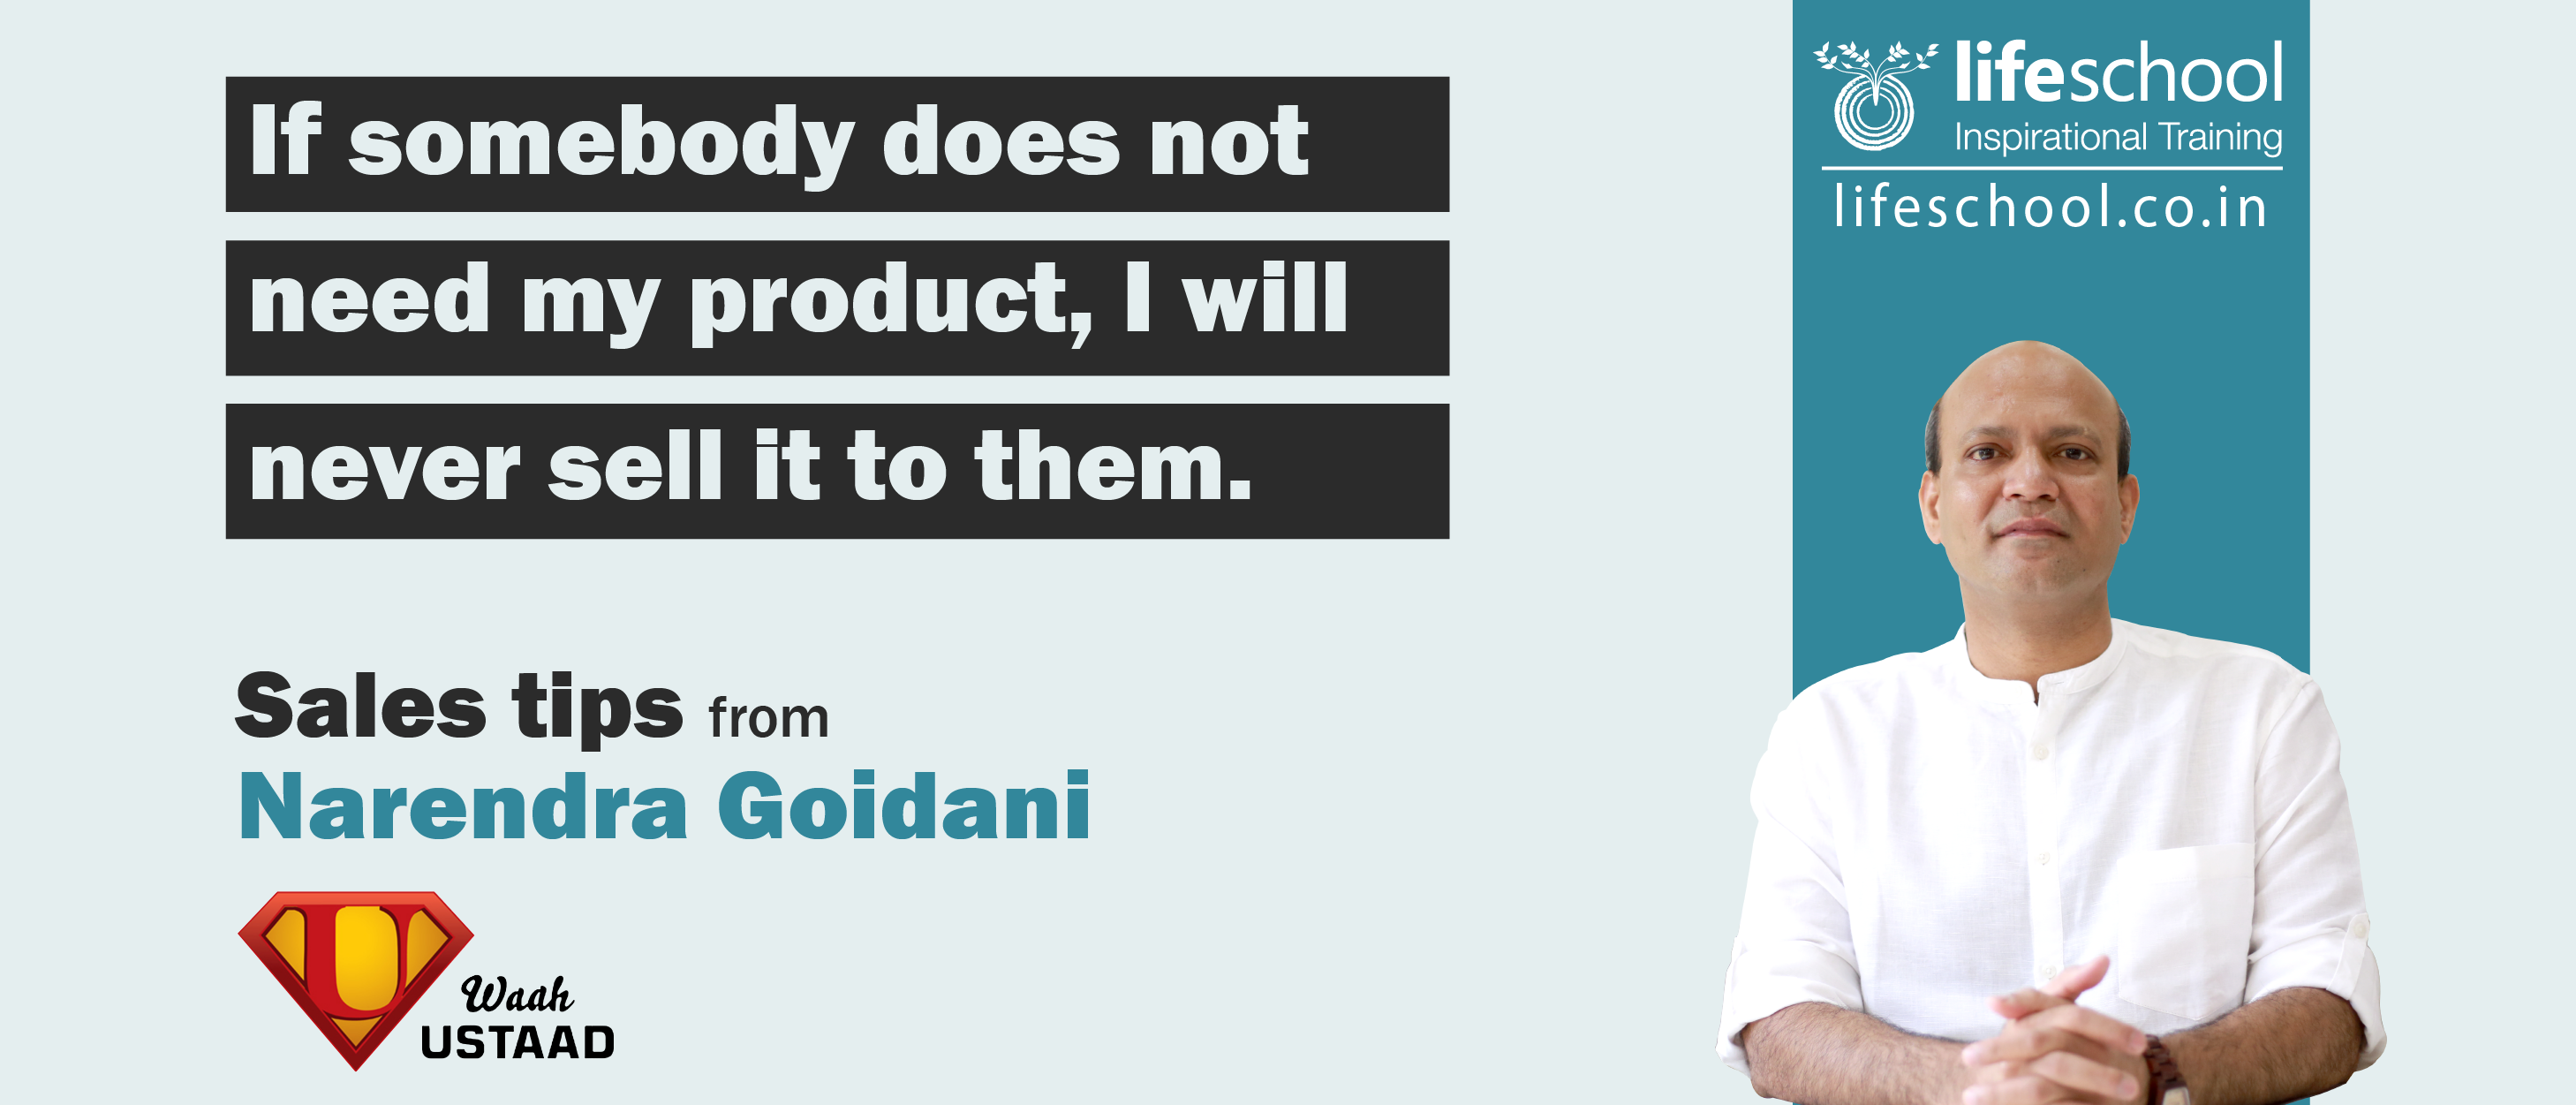 If somebody does not need my product, I will never sell it to them.